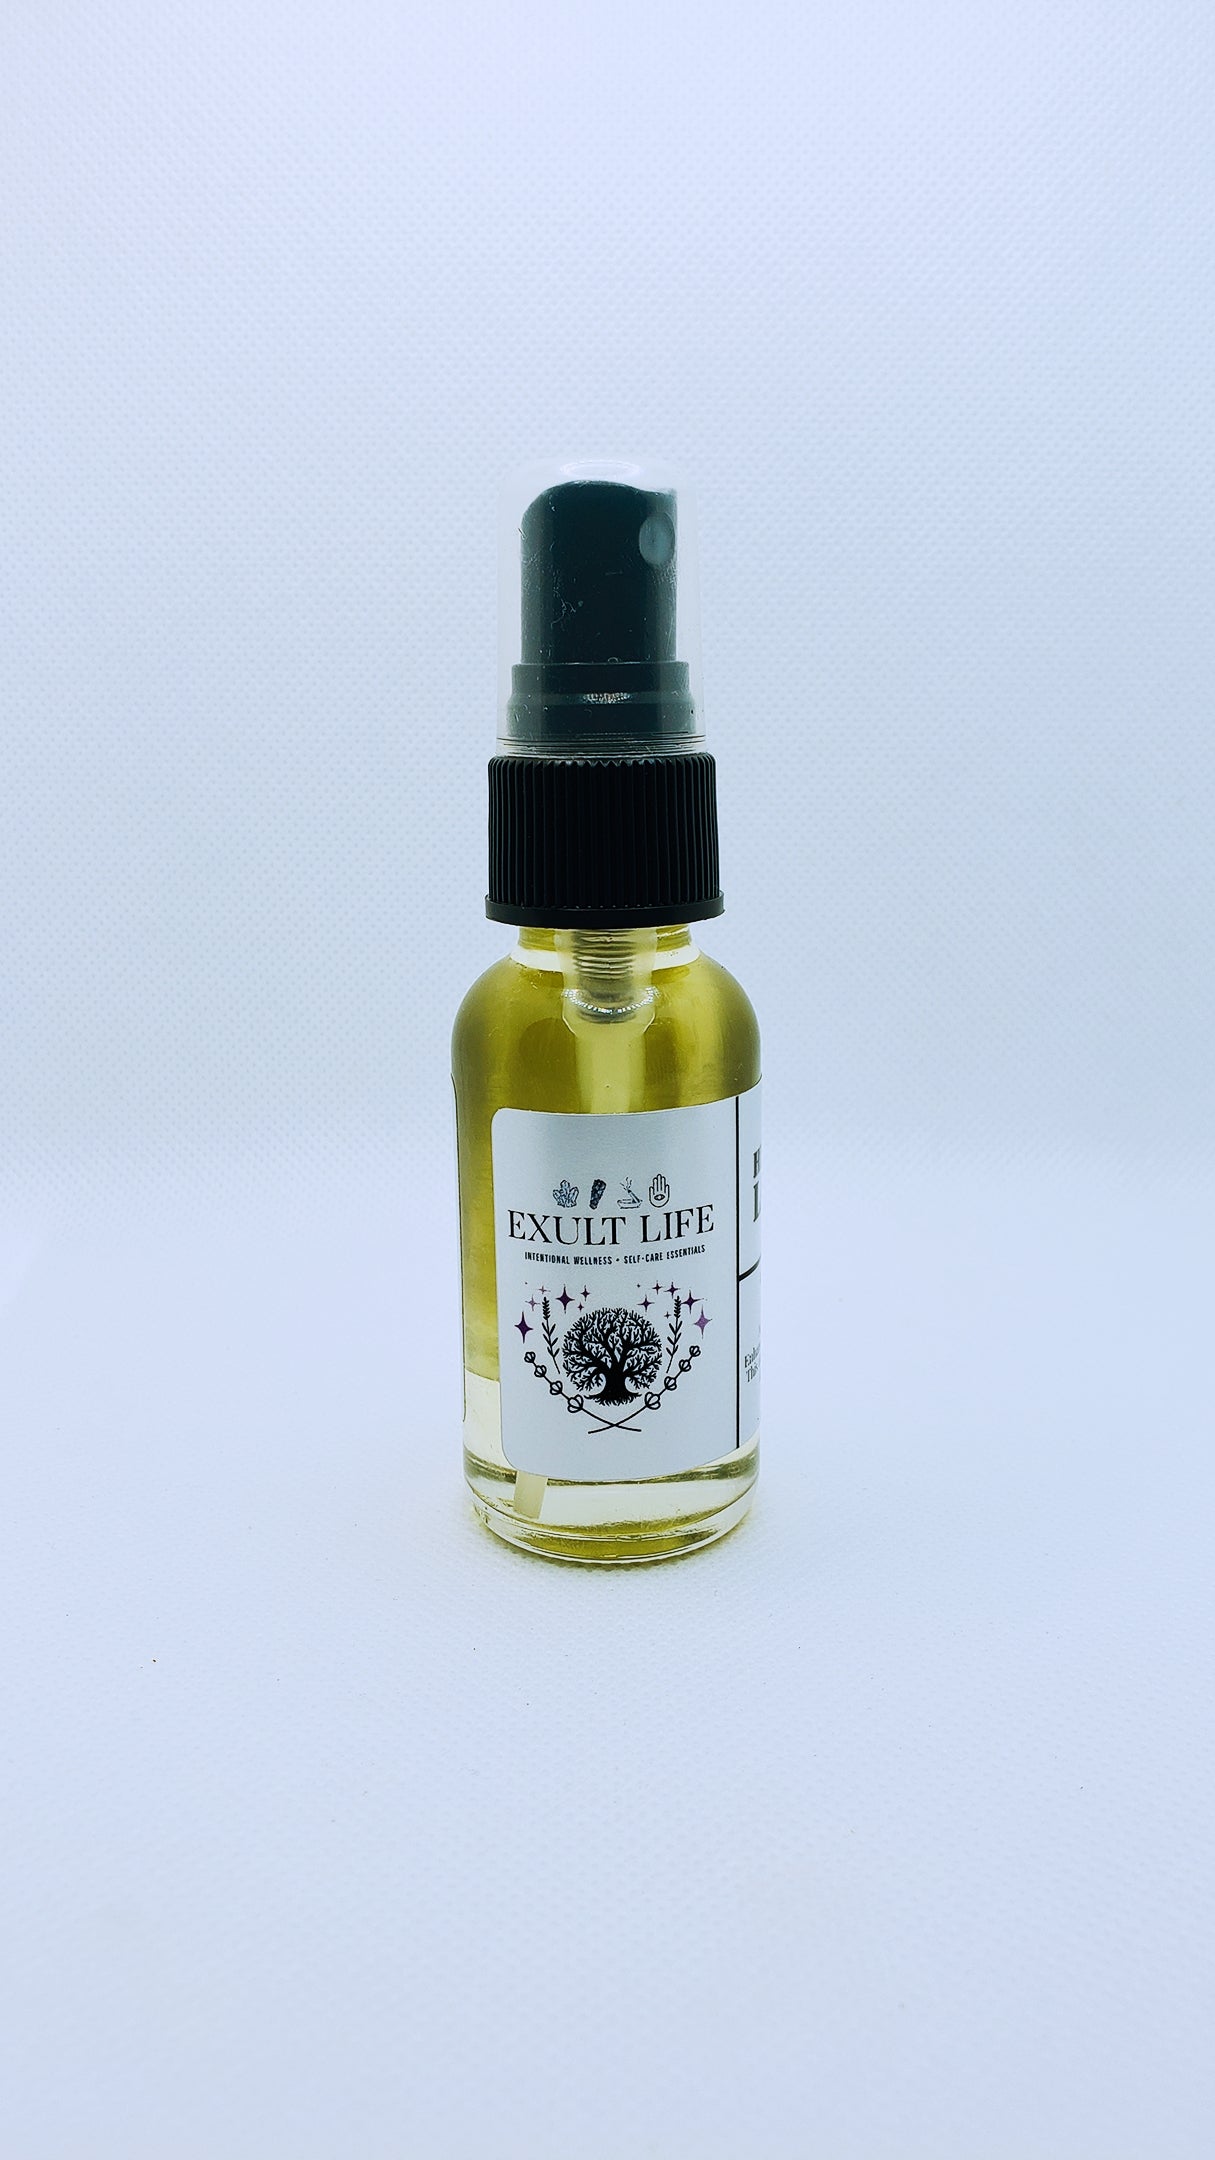 A little goes a long way with this light-weight, hydrating facial oil. 1 oz bottle